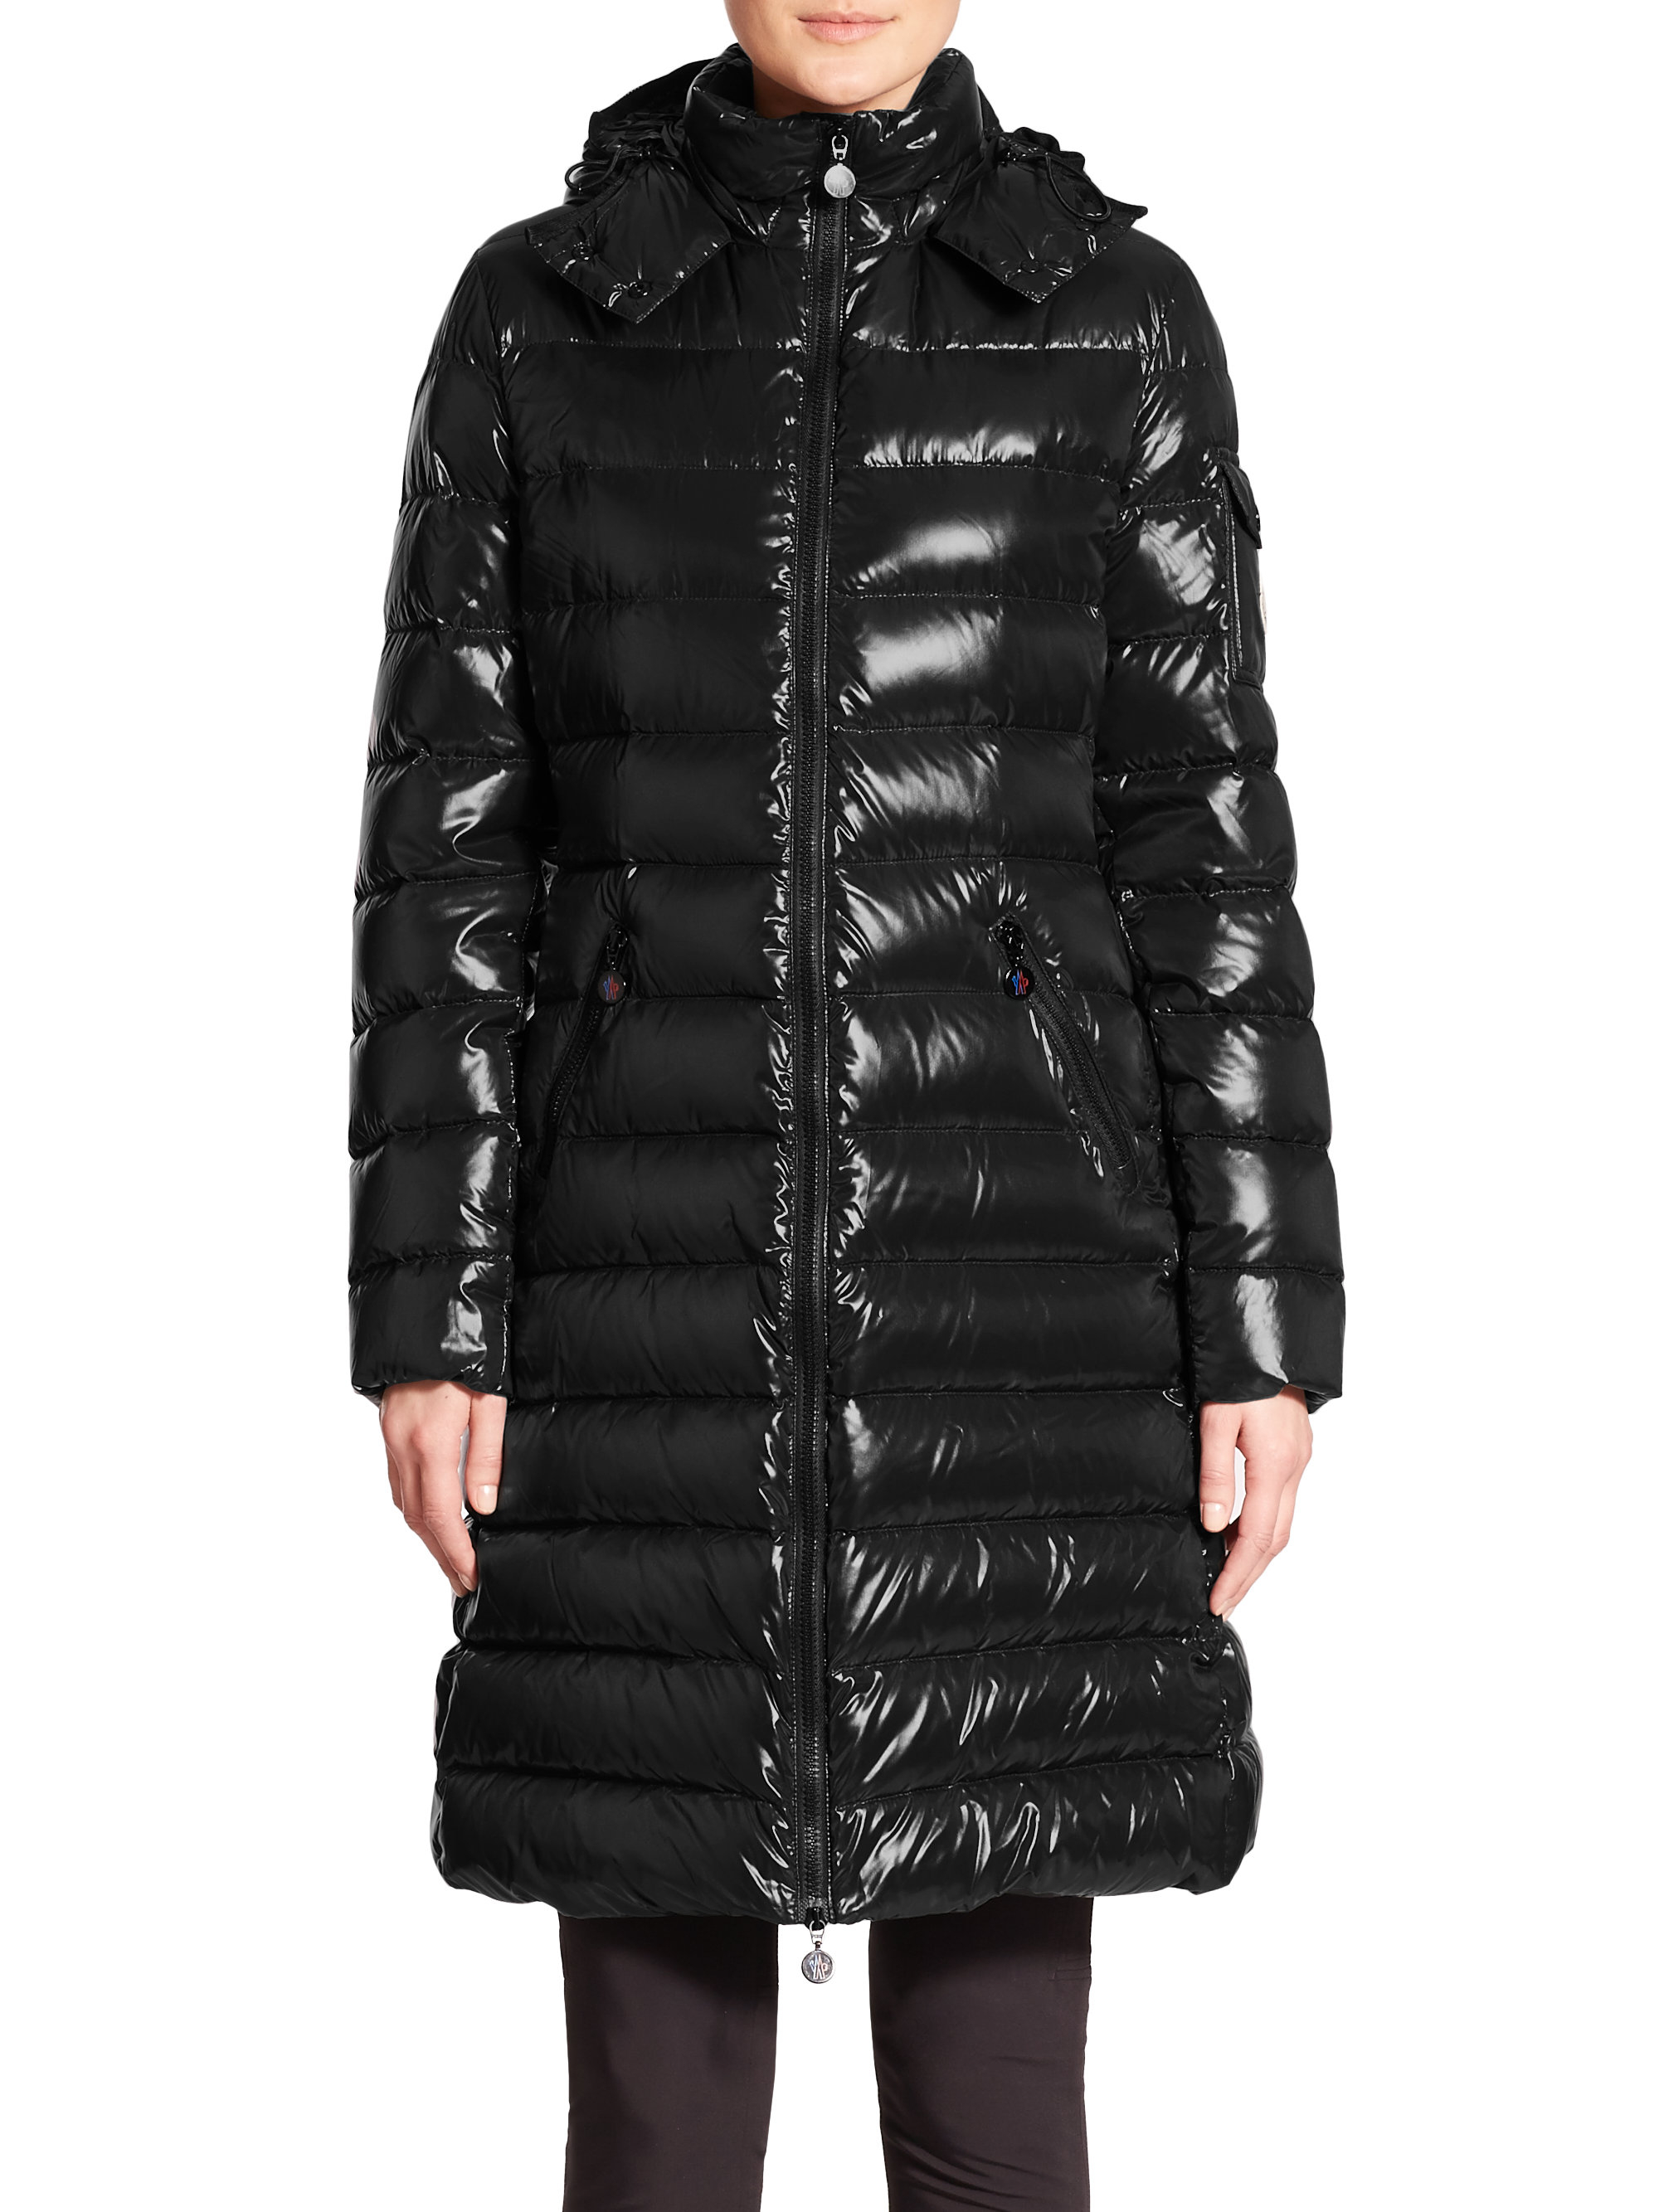 Moncler Moka Long Quilted Puffer Jacket in Black | Lyst